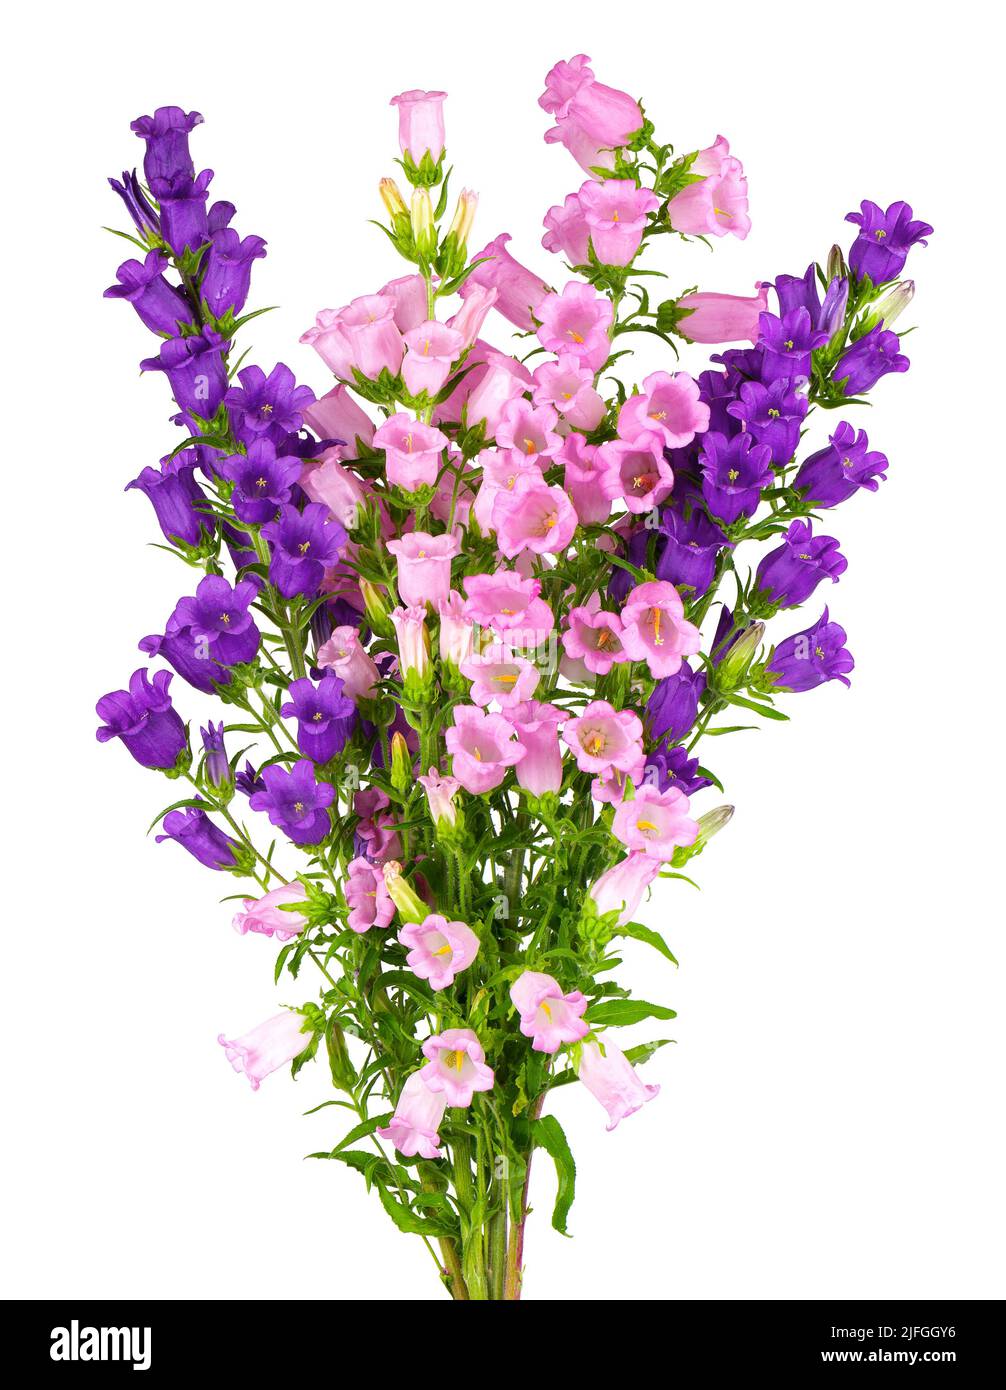 Campanula medium flowers isolated on white background. Bouquet of Canterbury bells or bell flower Stock Photo